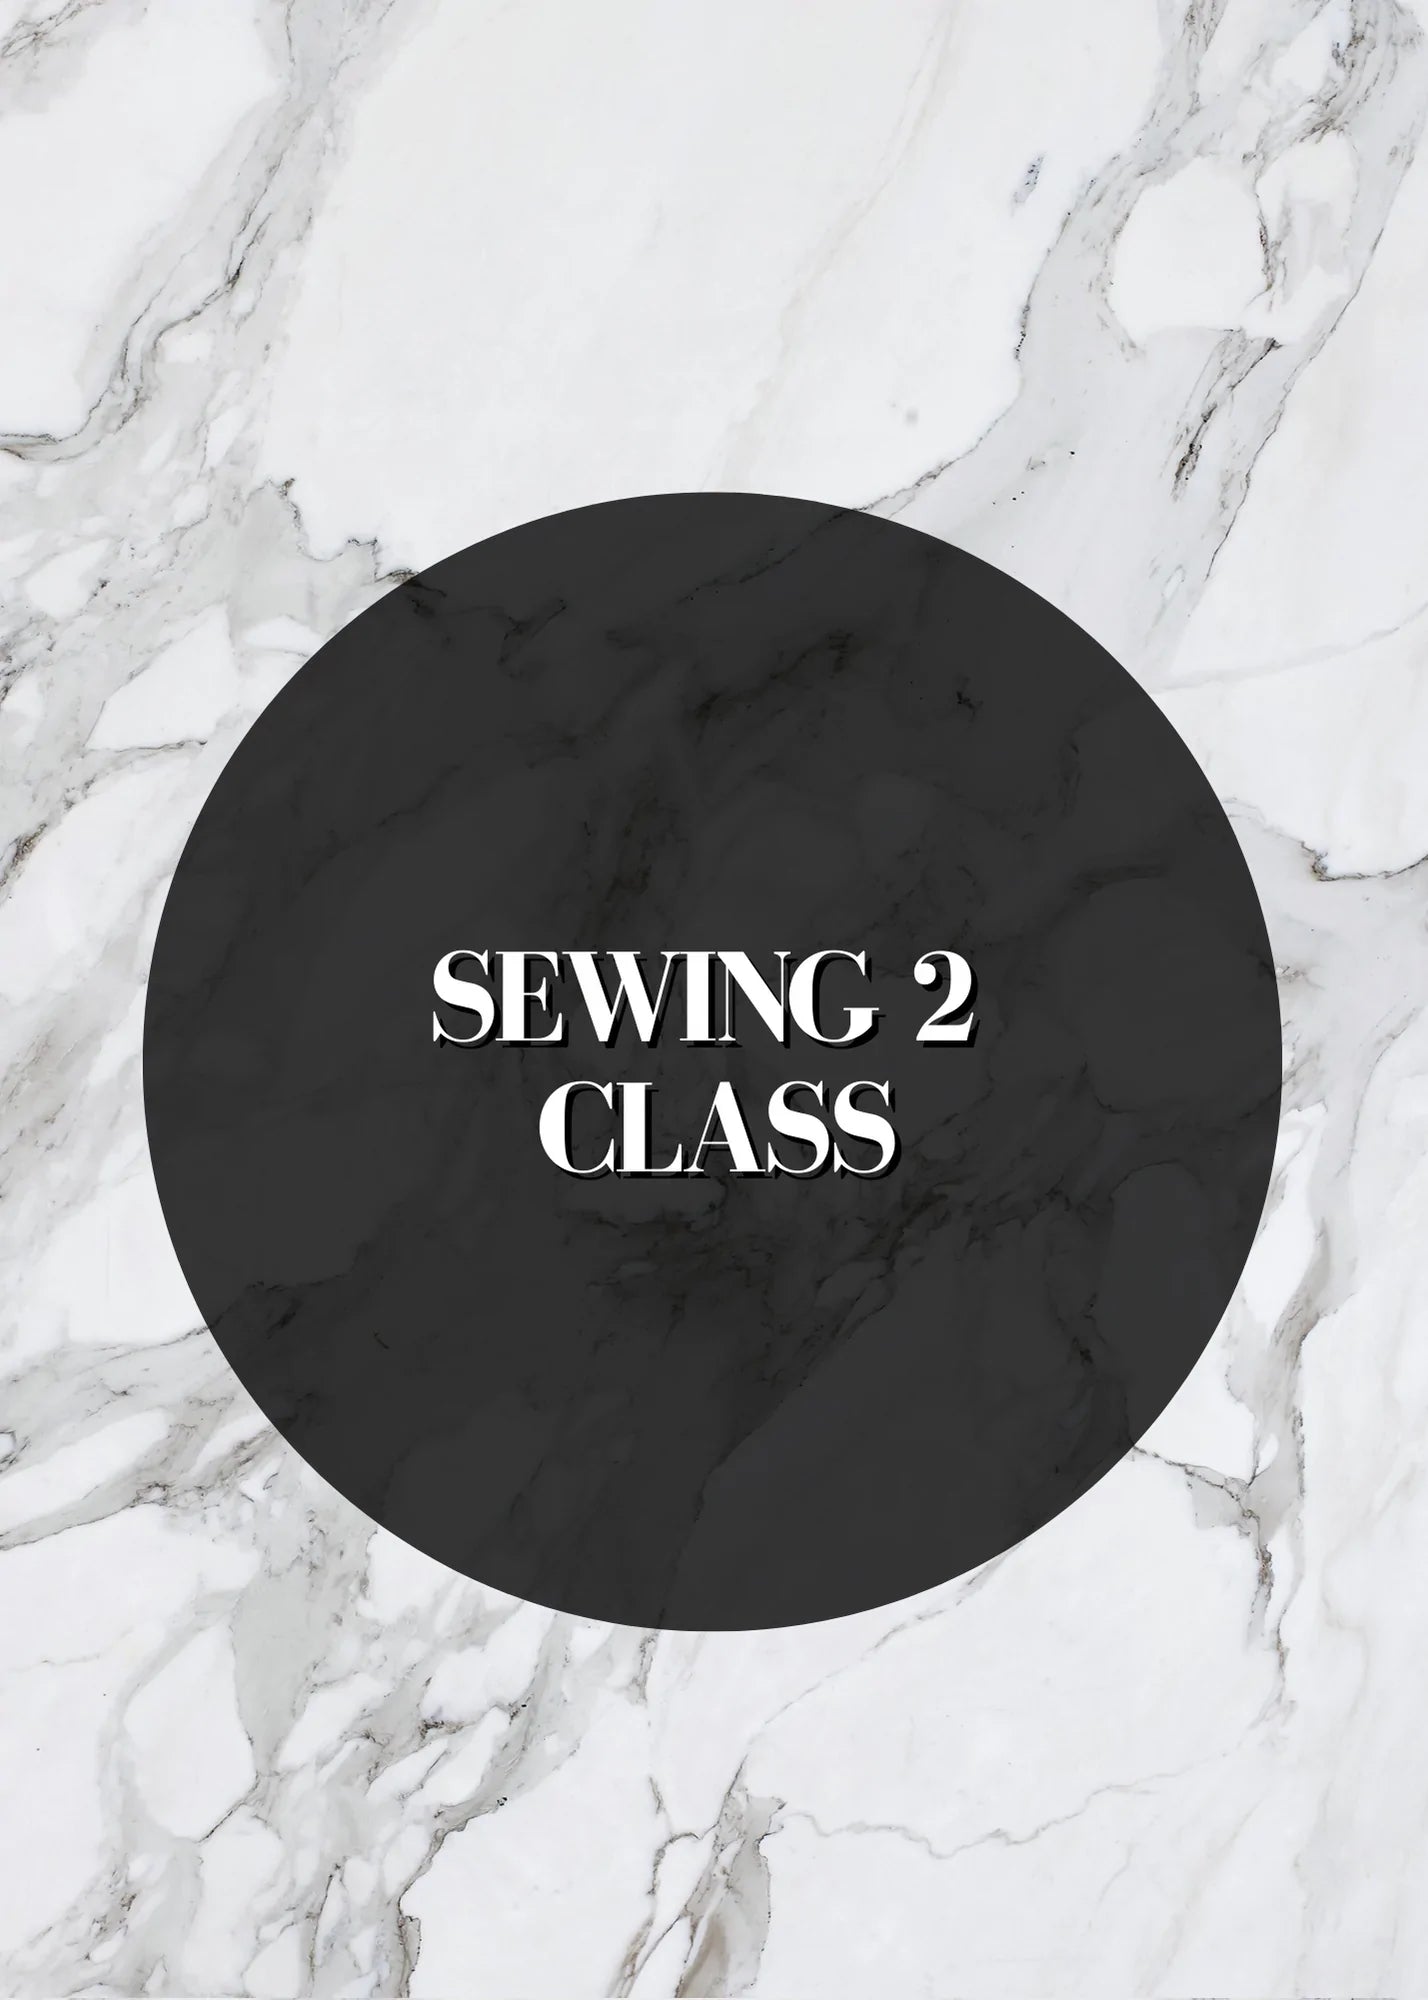 Construction: Sewing 2